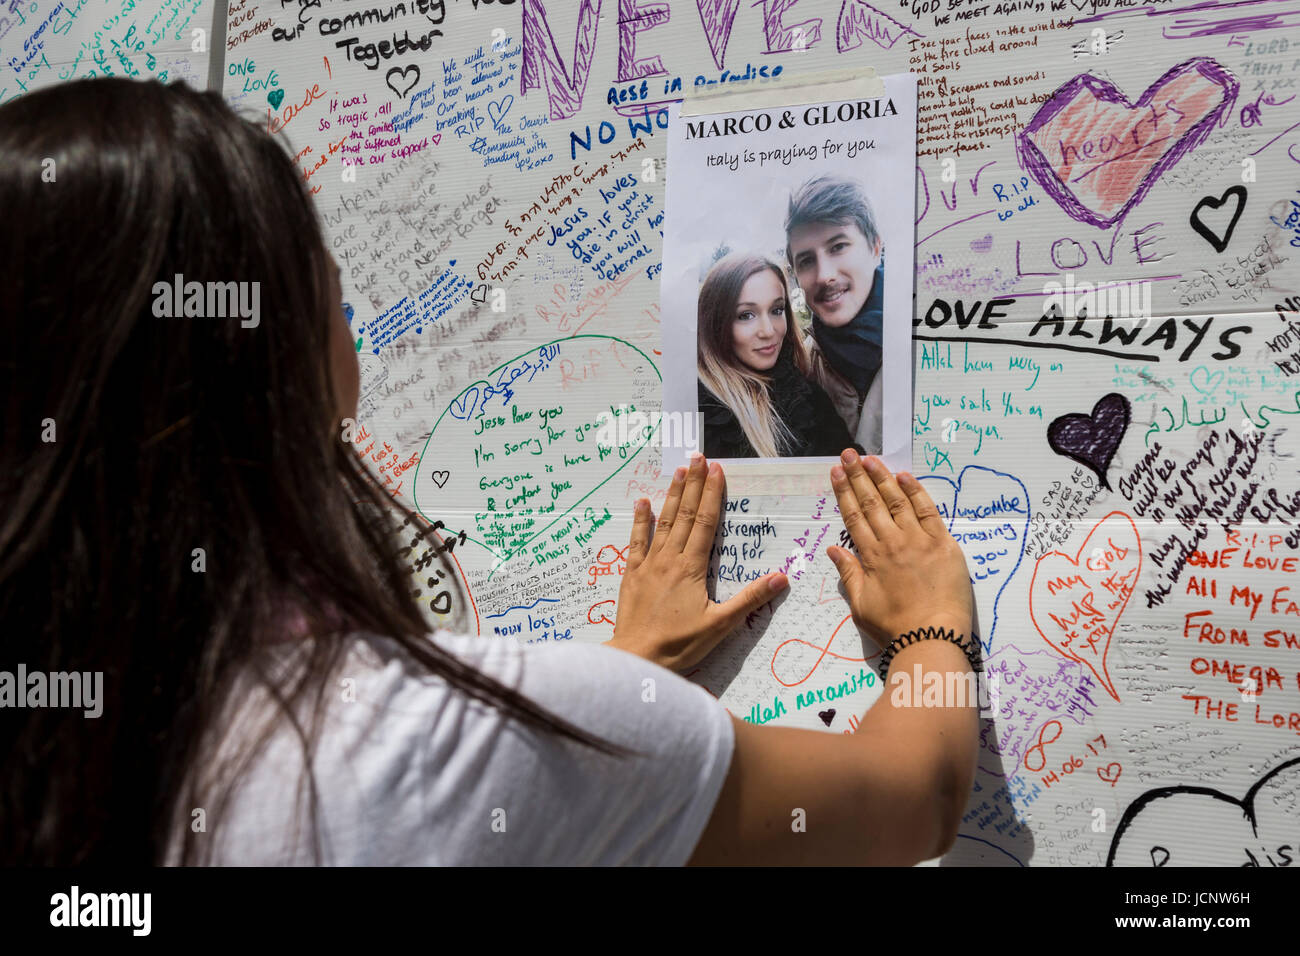 London, UK. 16th June, 2017. A young woman puts up a poster of missing friends. The Notting Hill community mourns the victims and comes together to help those who lost everything after the Grenfell Tower fire on Wednesday. Credit: Bettina Strenske/Alamy Live News Stock Photo